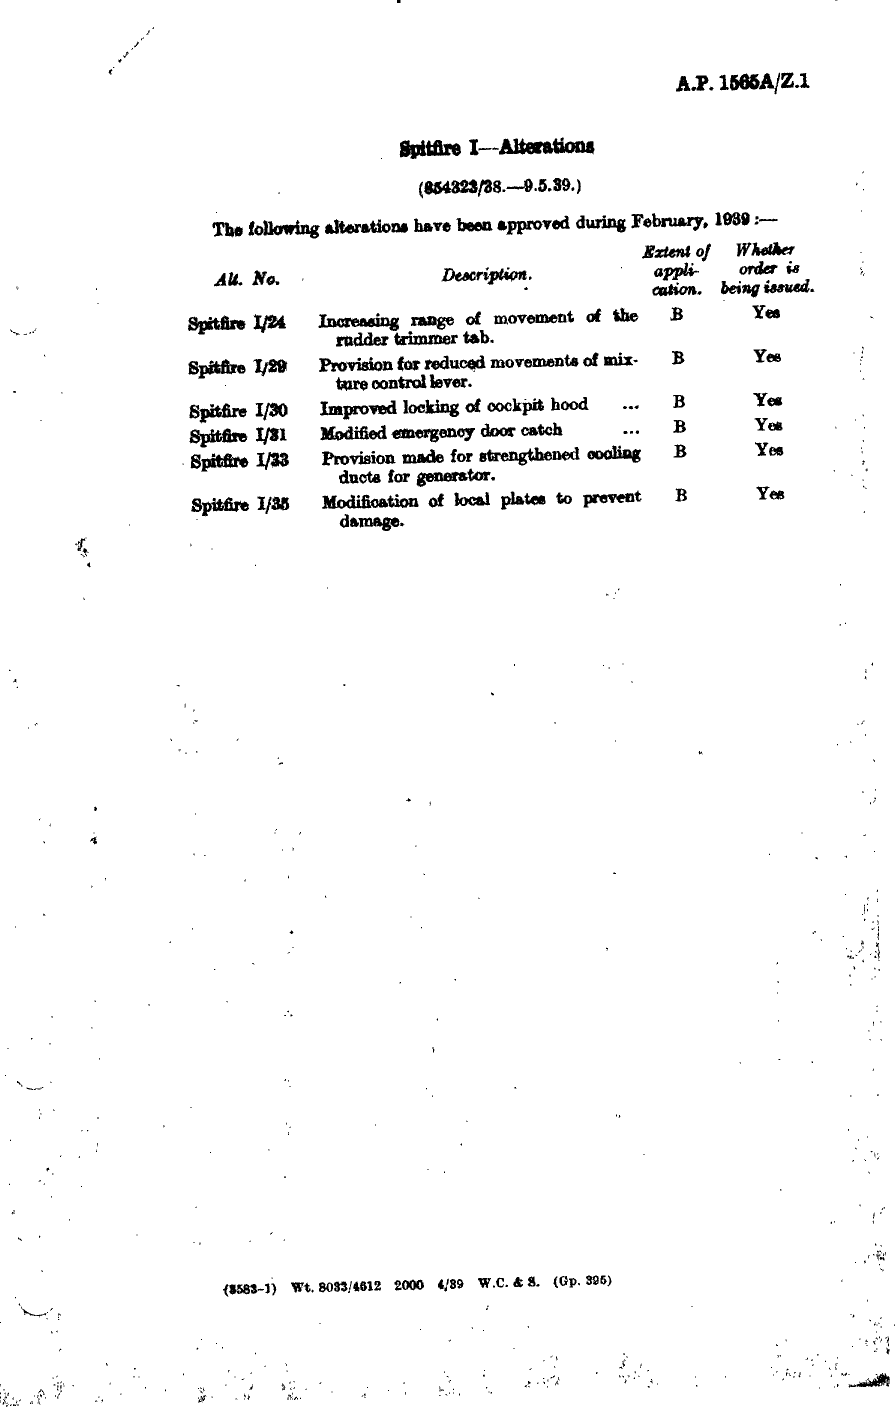 Sample page 1 from AirCorps Library document: Spitfire I Alterations 24, 29, 30, 31, 33 and 35